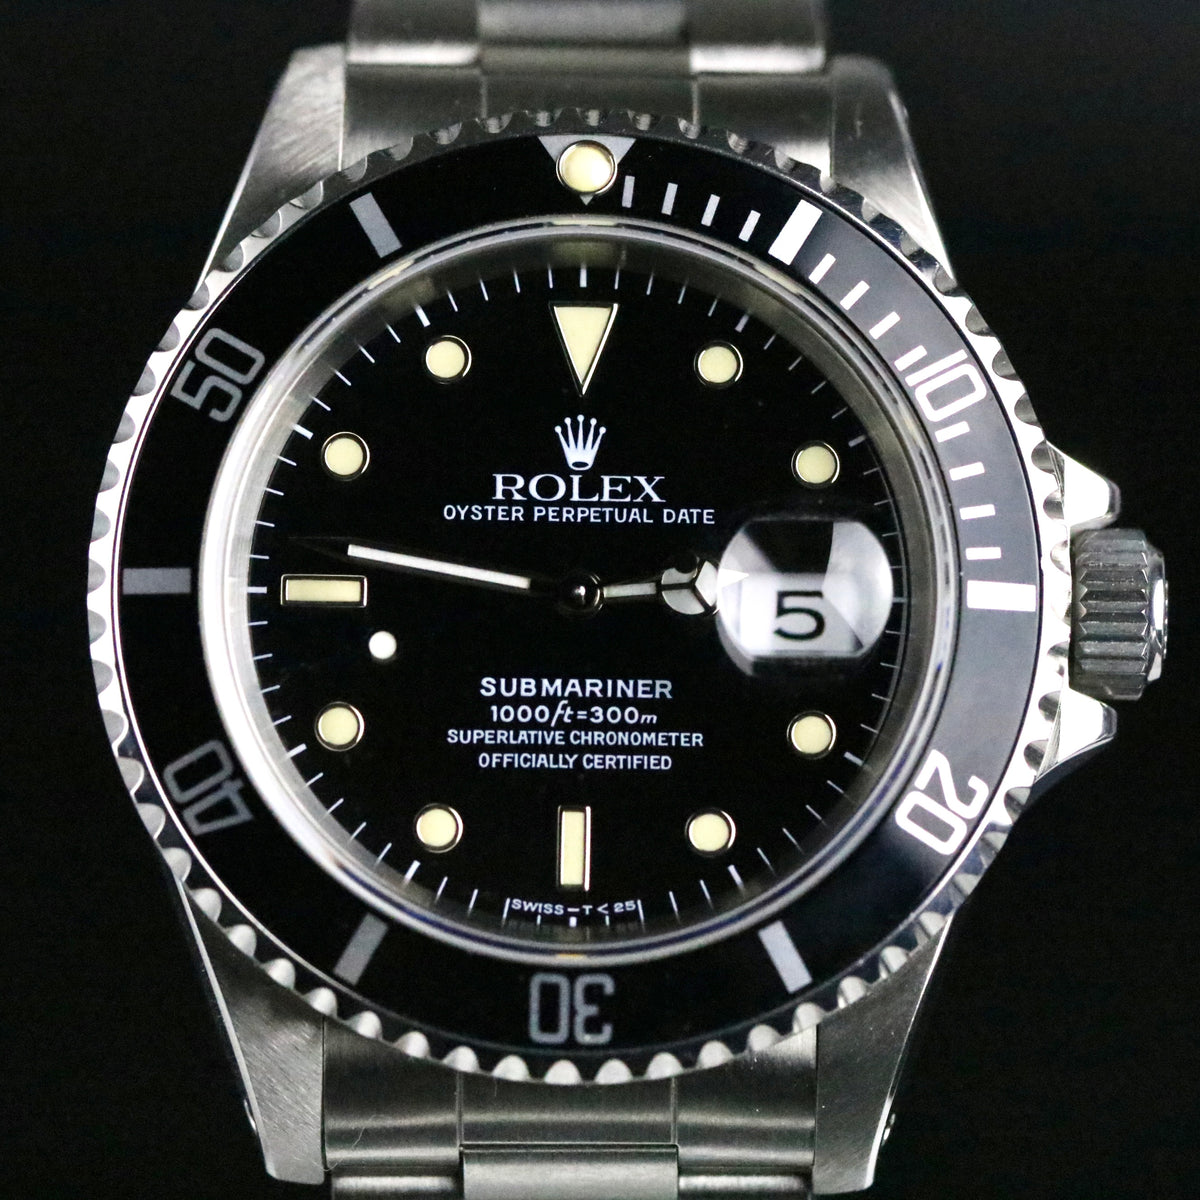 1991 Rolex 16610 Submariner Cream Patina with Box, Papers, RSC